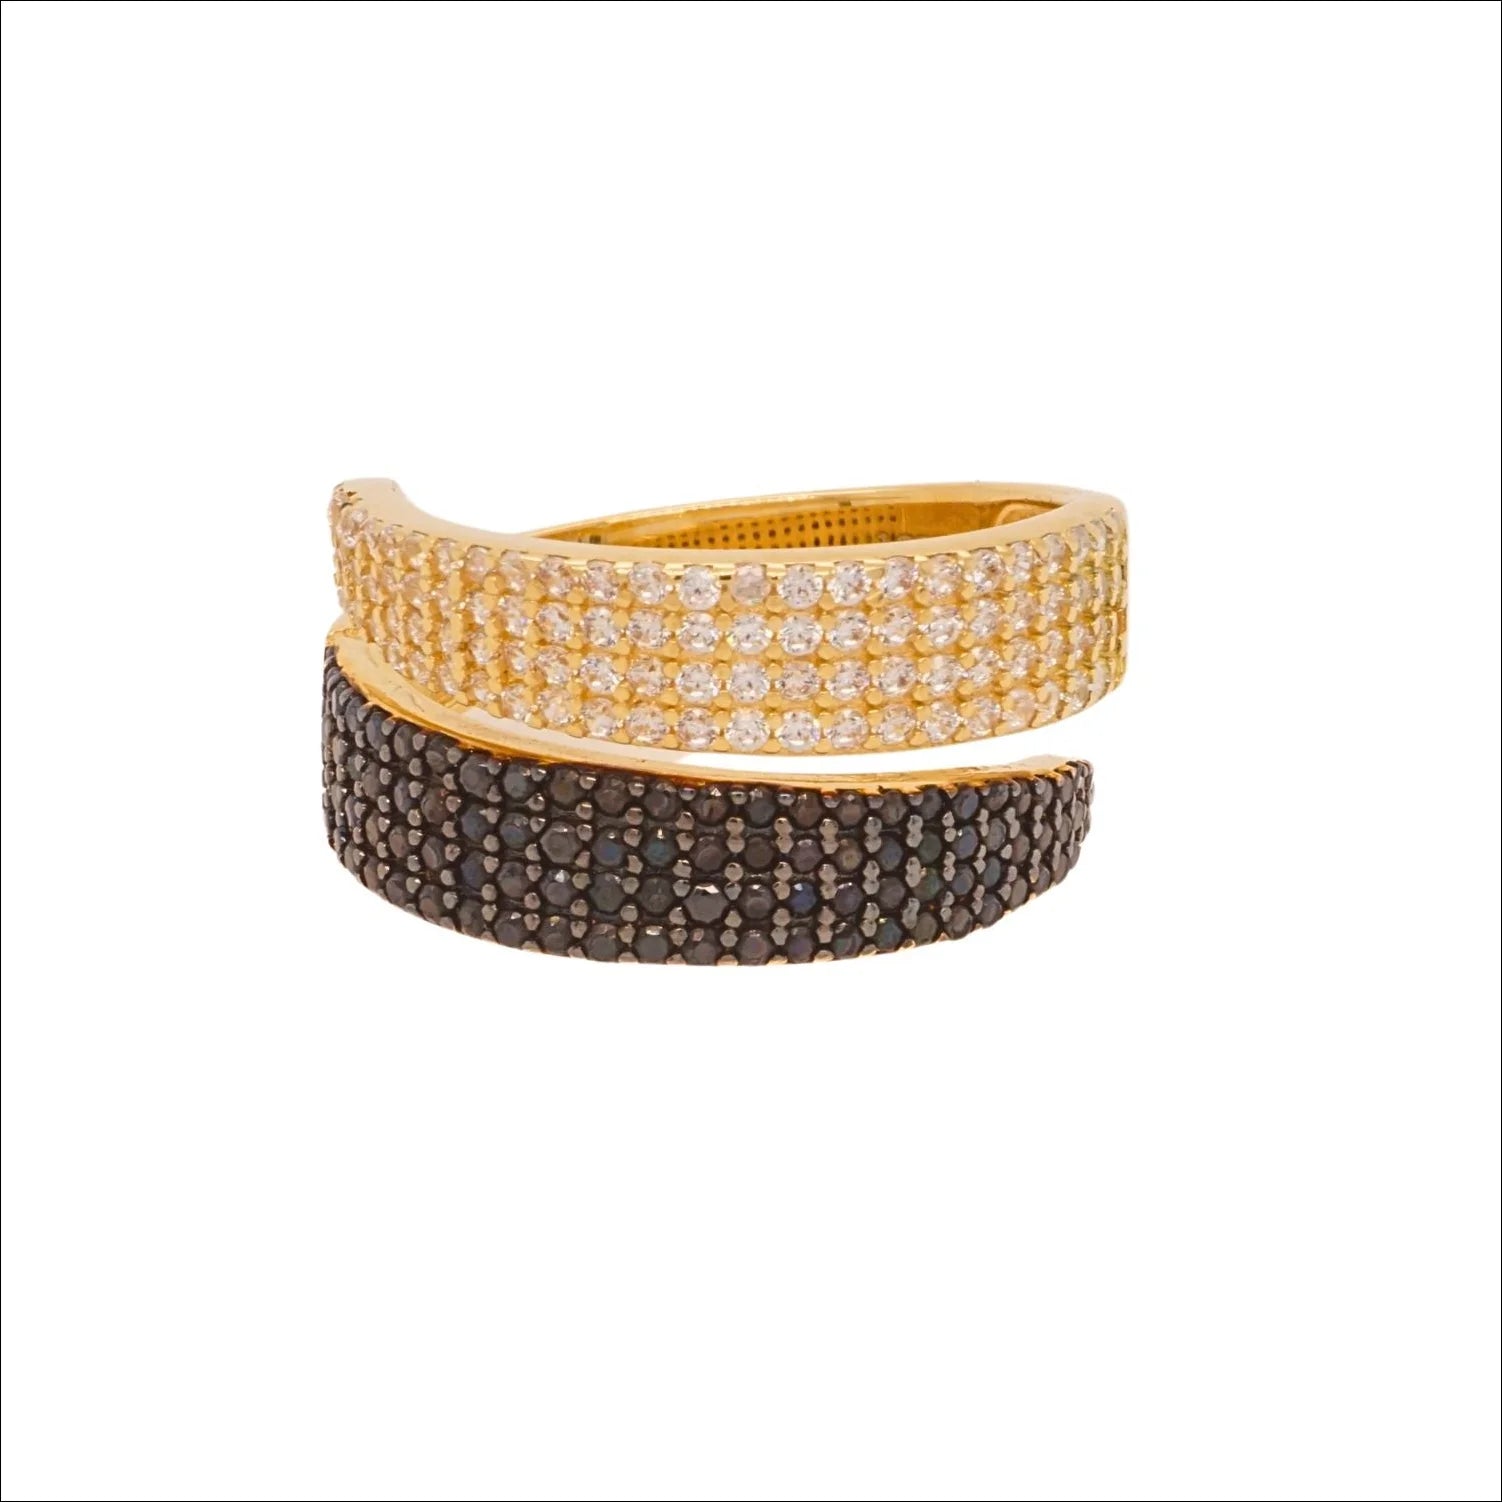 Sophisticated contrast: 18k gold ring with cz | Above $1000